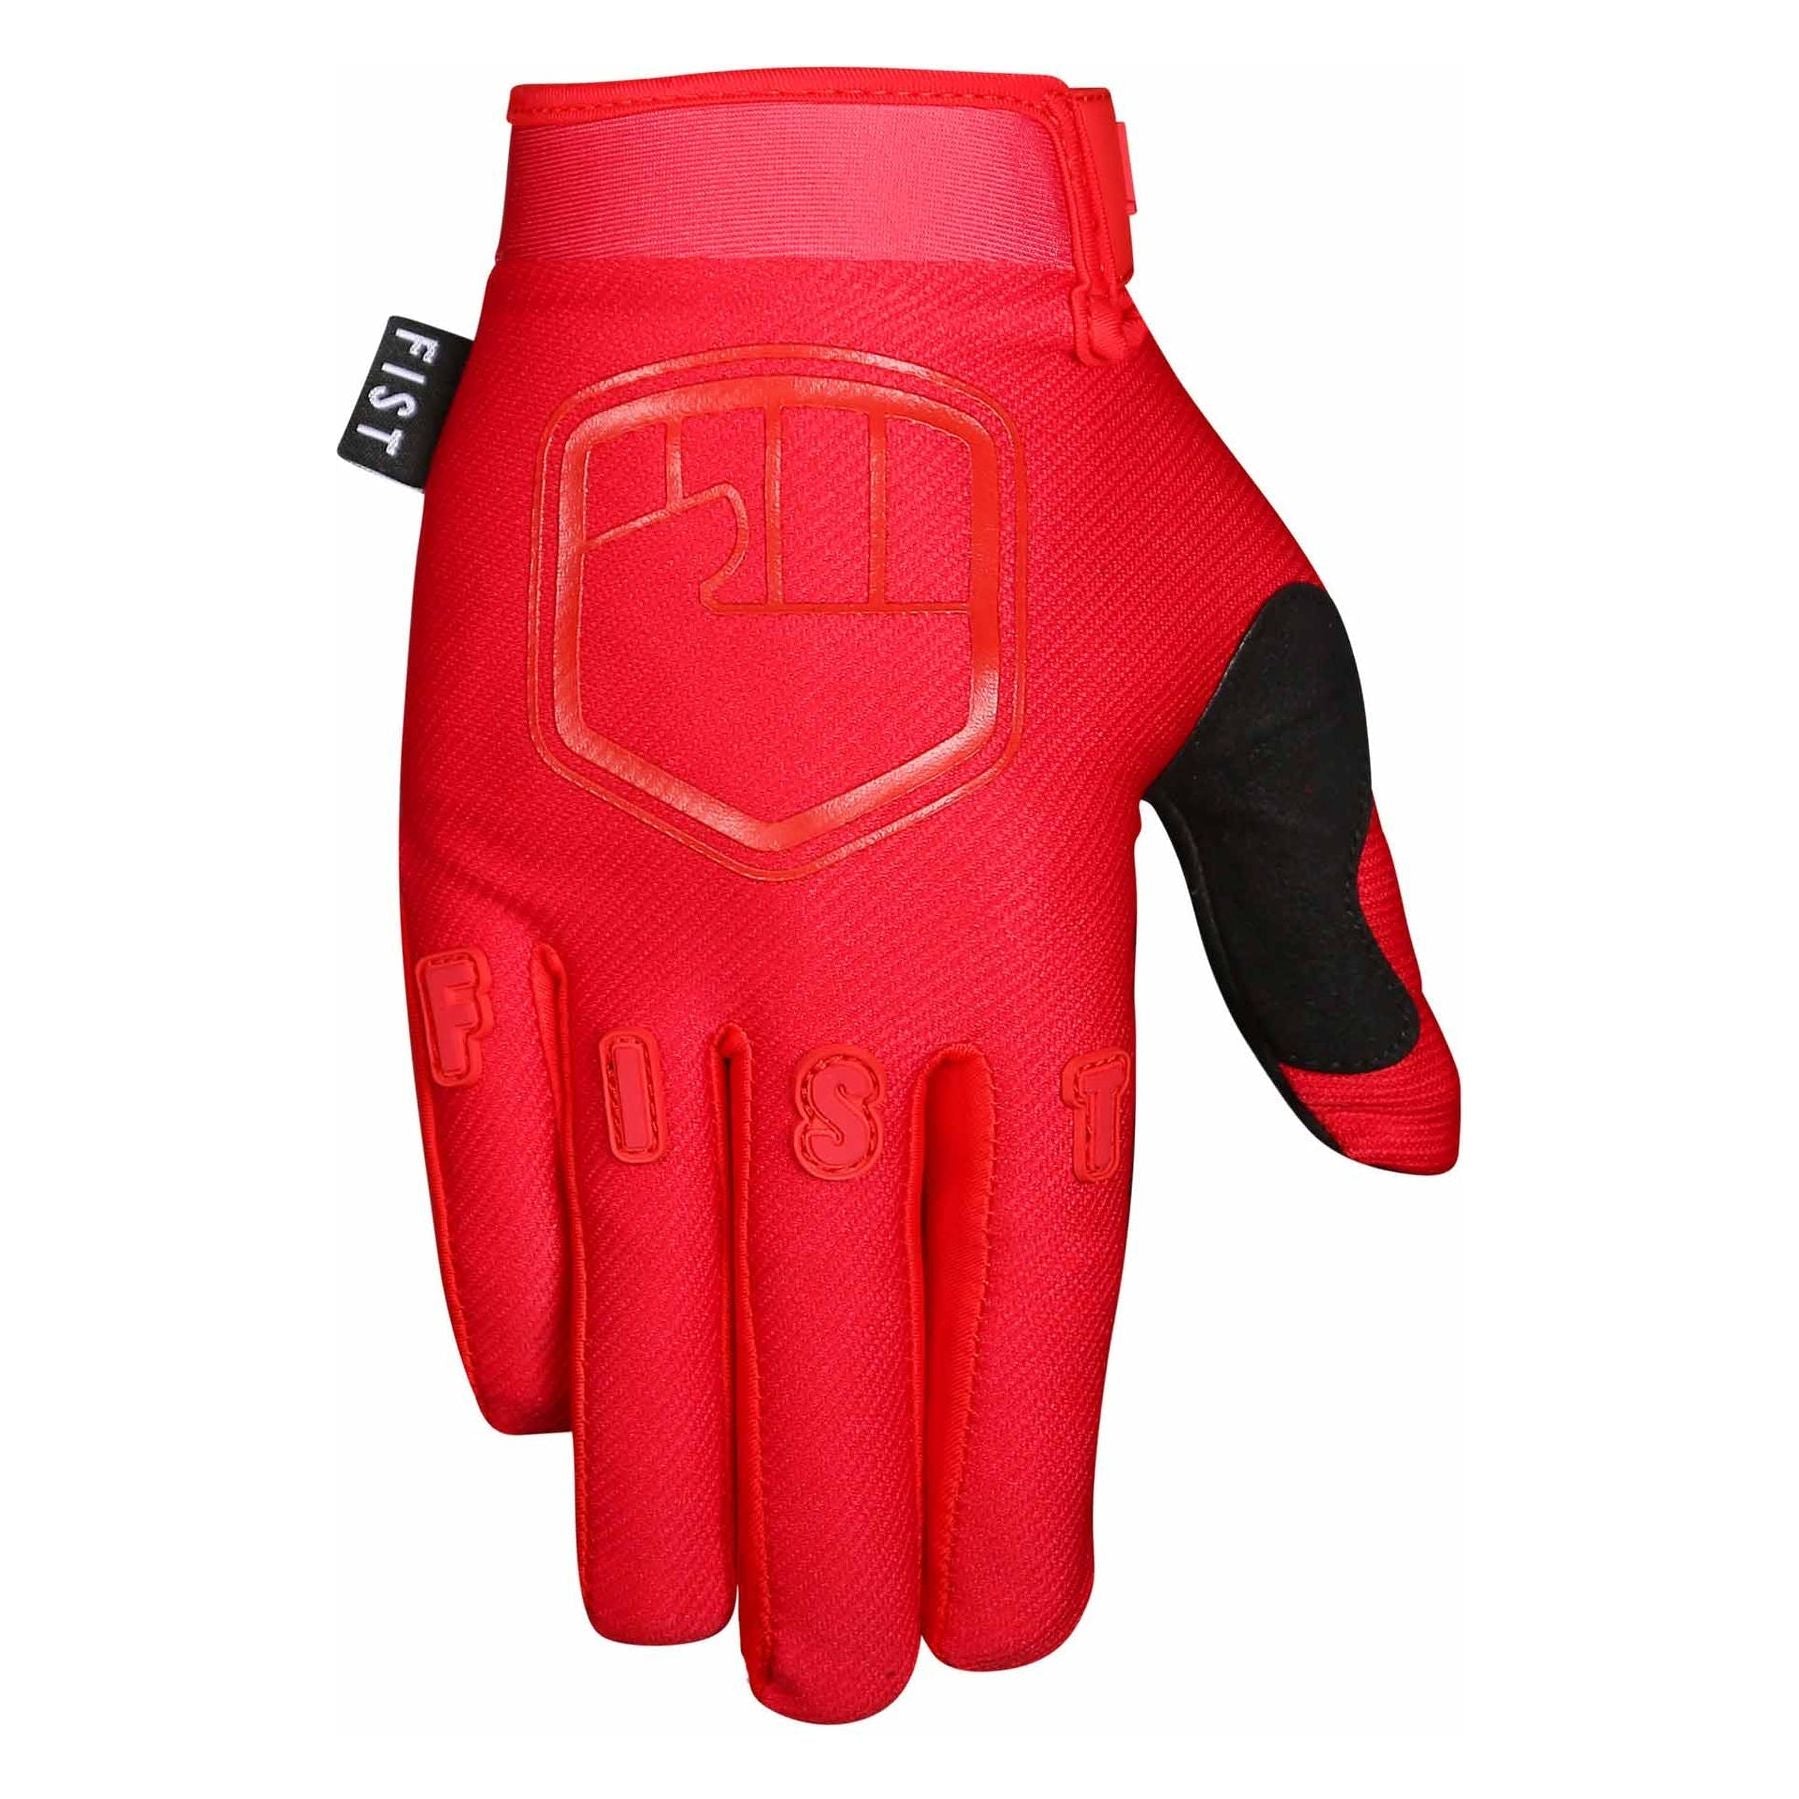 Fist Handwear Stocker Youth Strapped Glove - Youth S - Red Stocker - Image 1